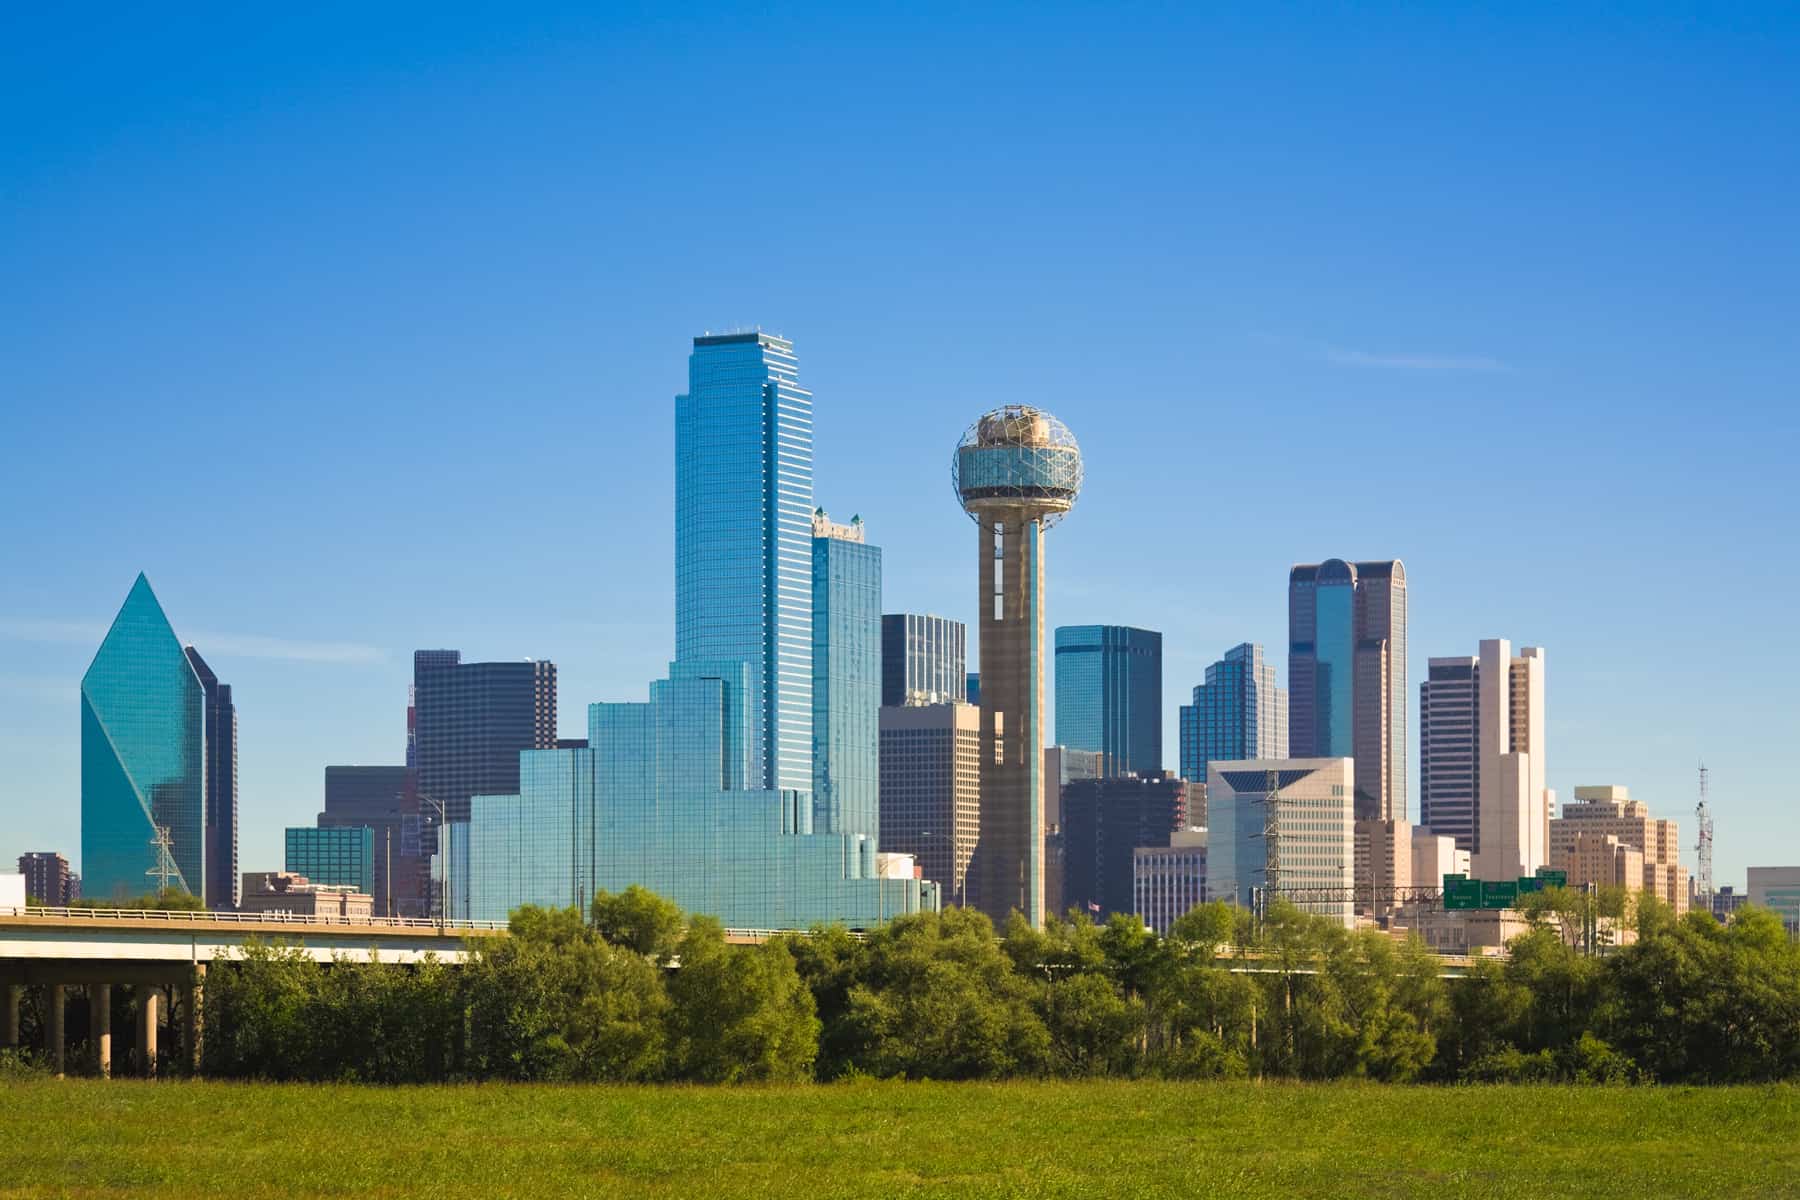 6 Fun Things to do Alone in Dallas During Drug or Alcohol Recovery